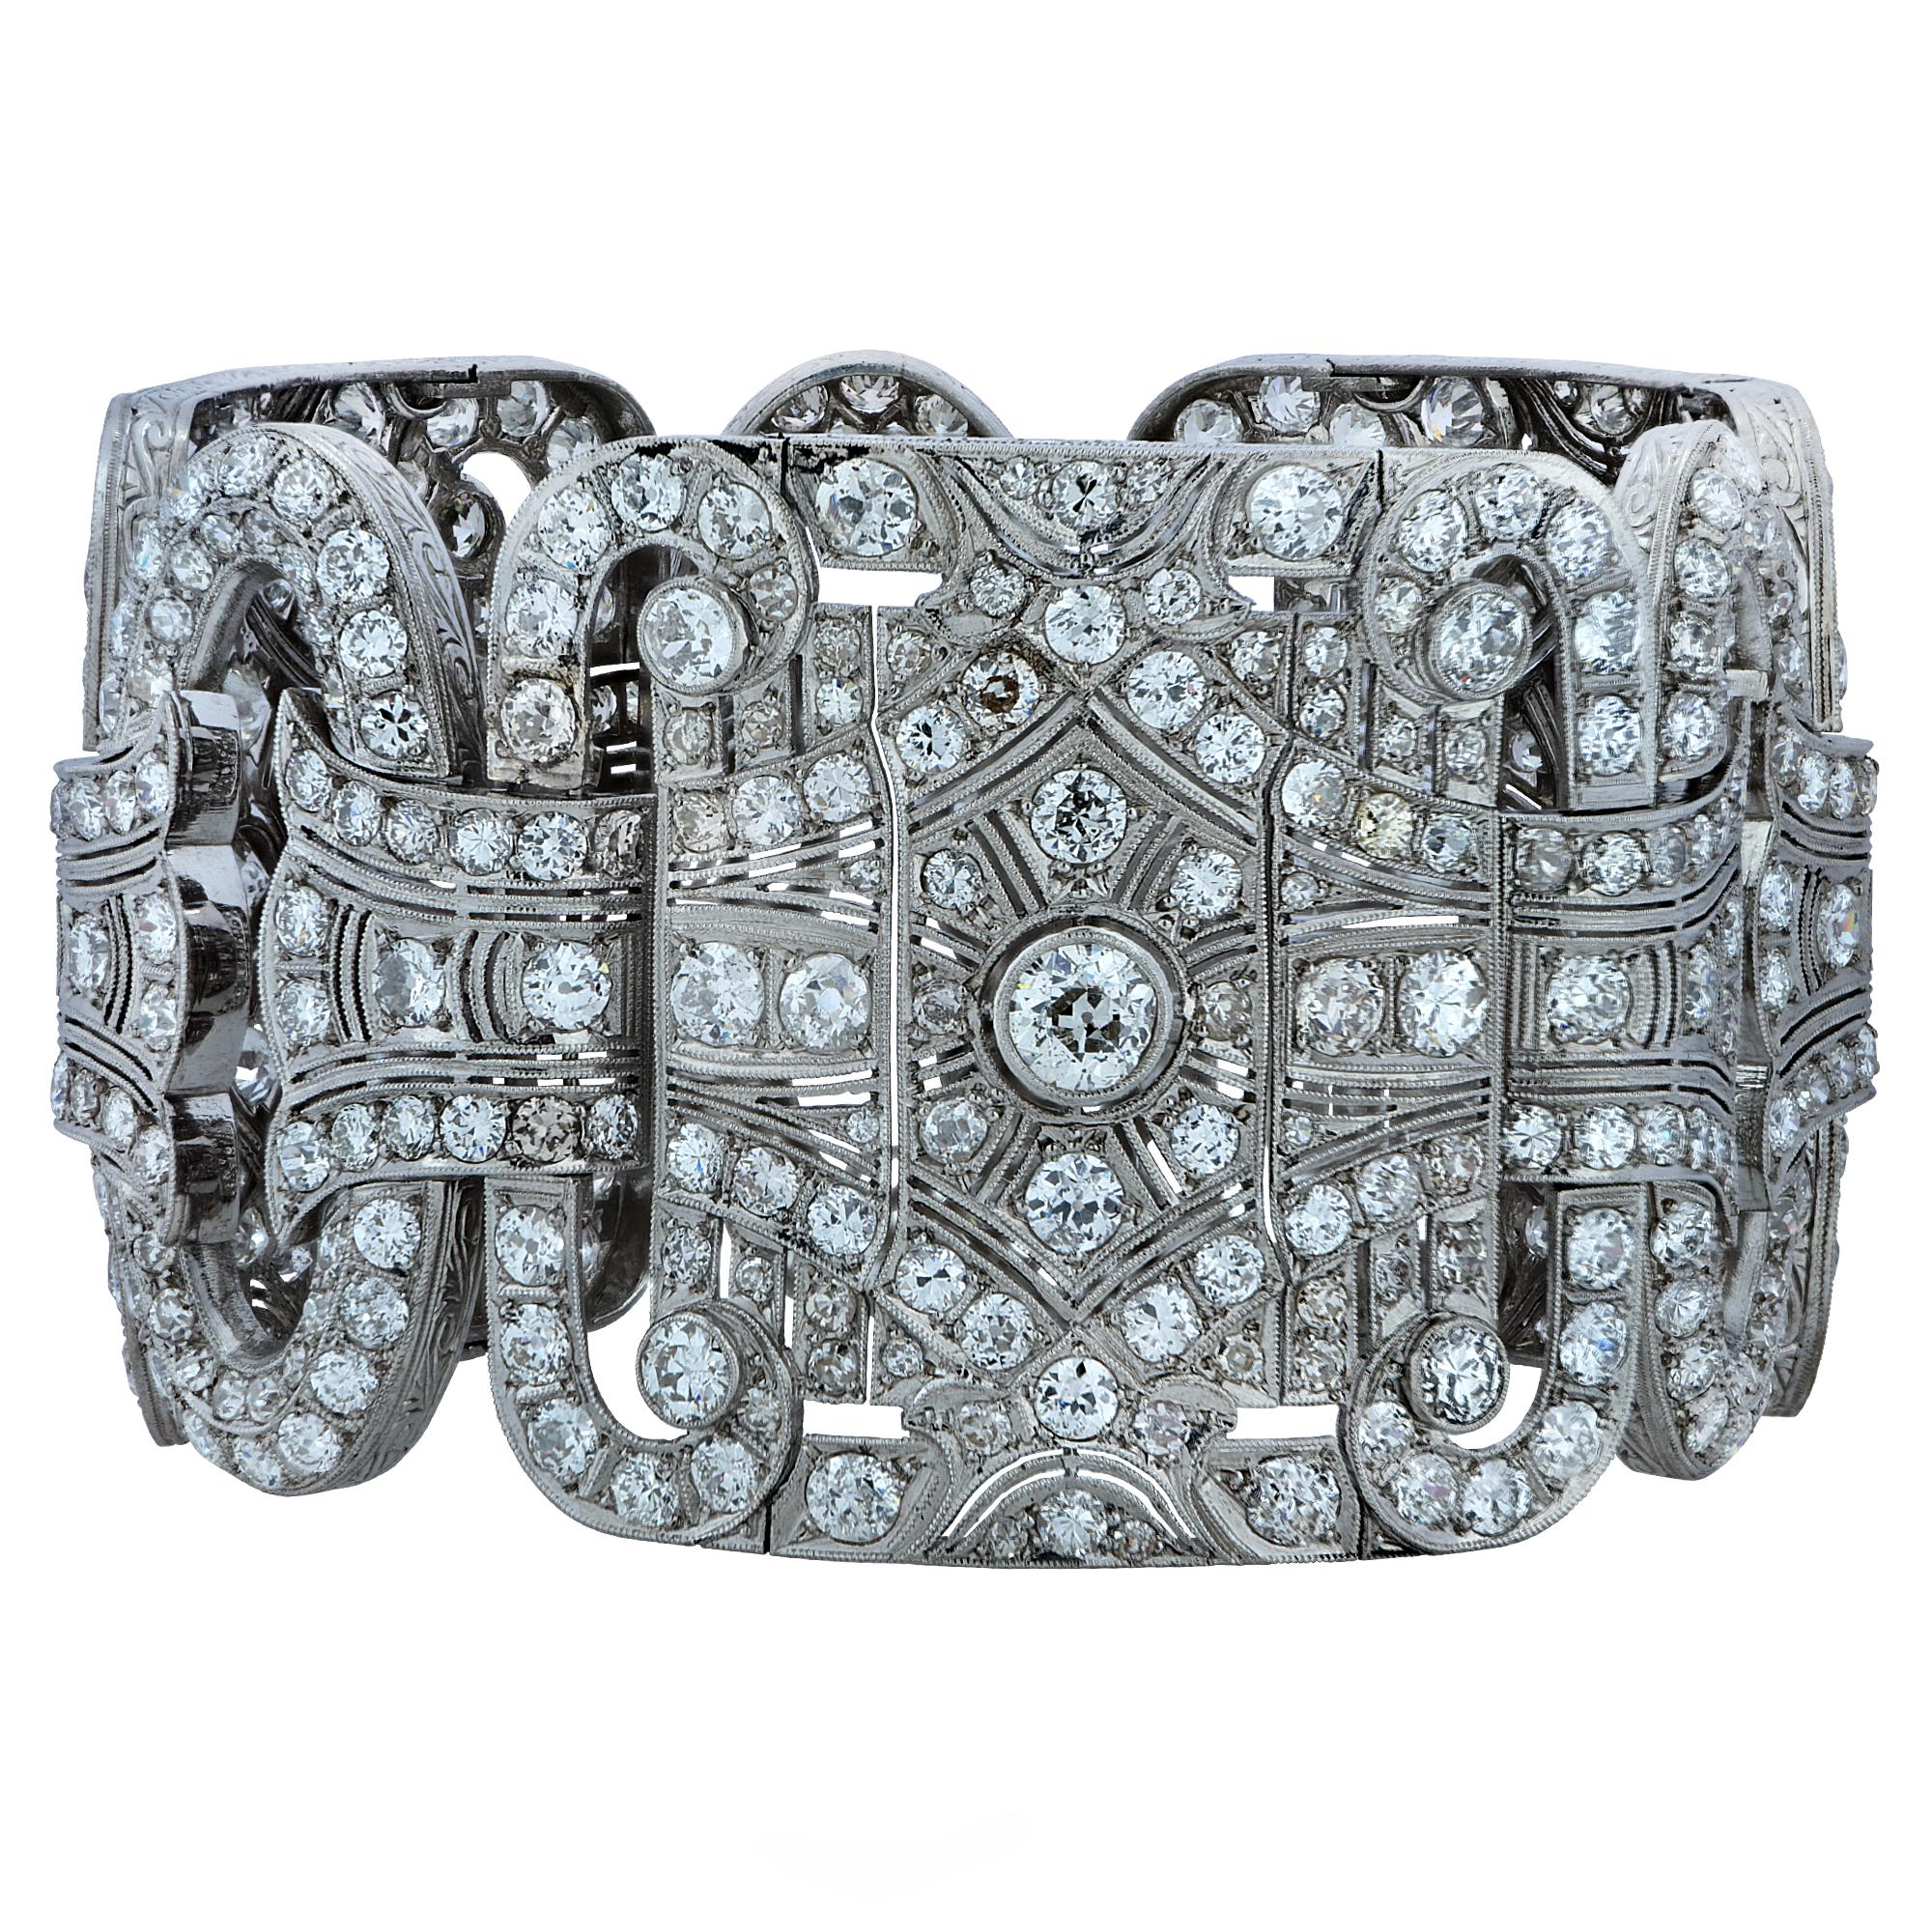 Spectacular Art Deco bracelet intricately hand crafted in platinum featuring 501 European cut and single cut diamonds weighing approximately 40 carats total, F-H color, SI1-I1 clarity. intricately set with millgrain. This sensational bold statement